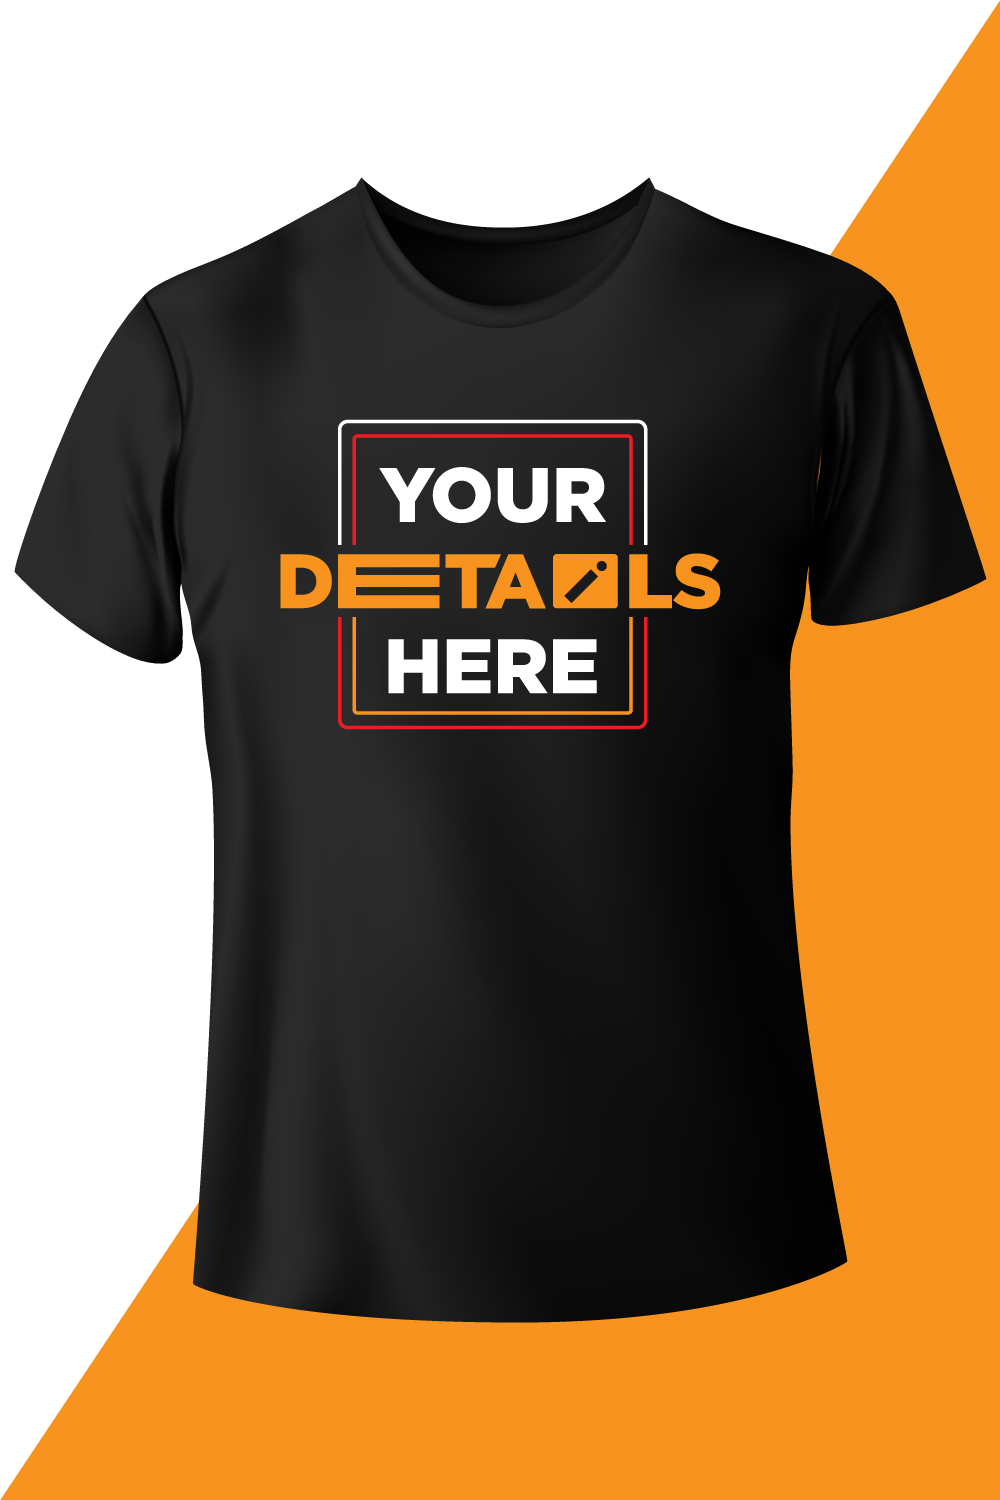 Image of a black t-shirt with an amazing slogan Your Details Here.